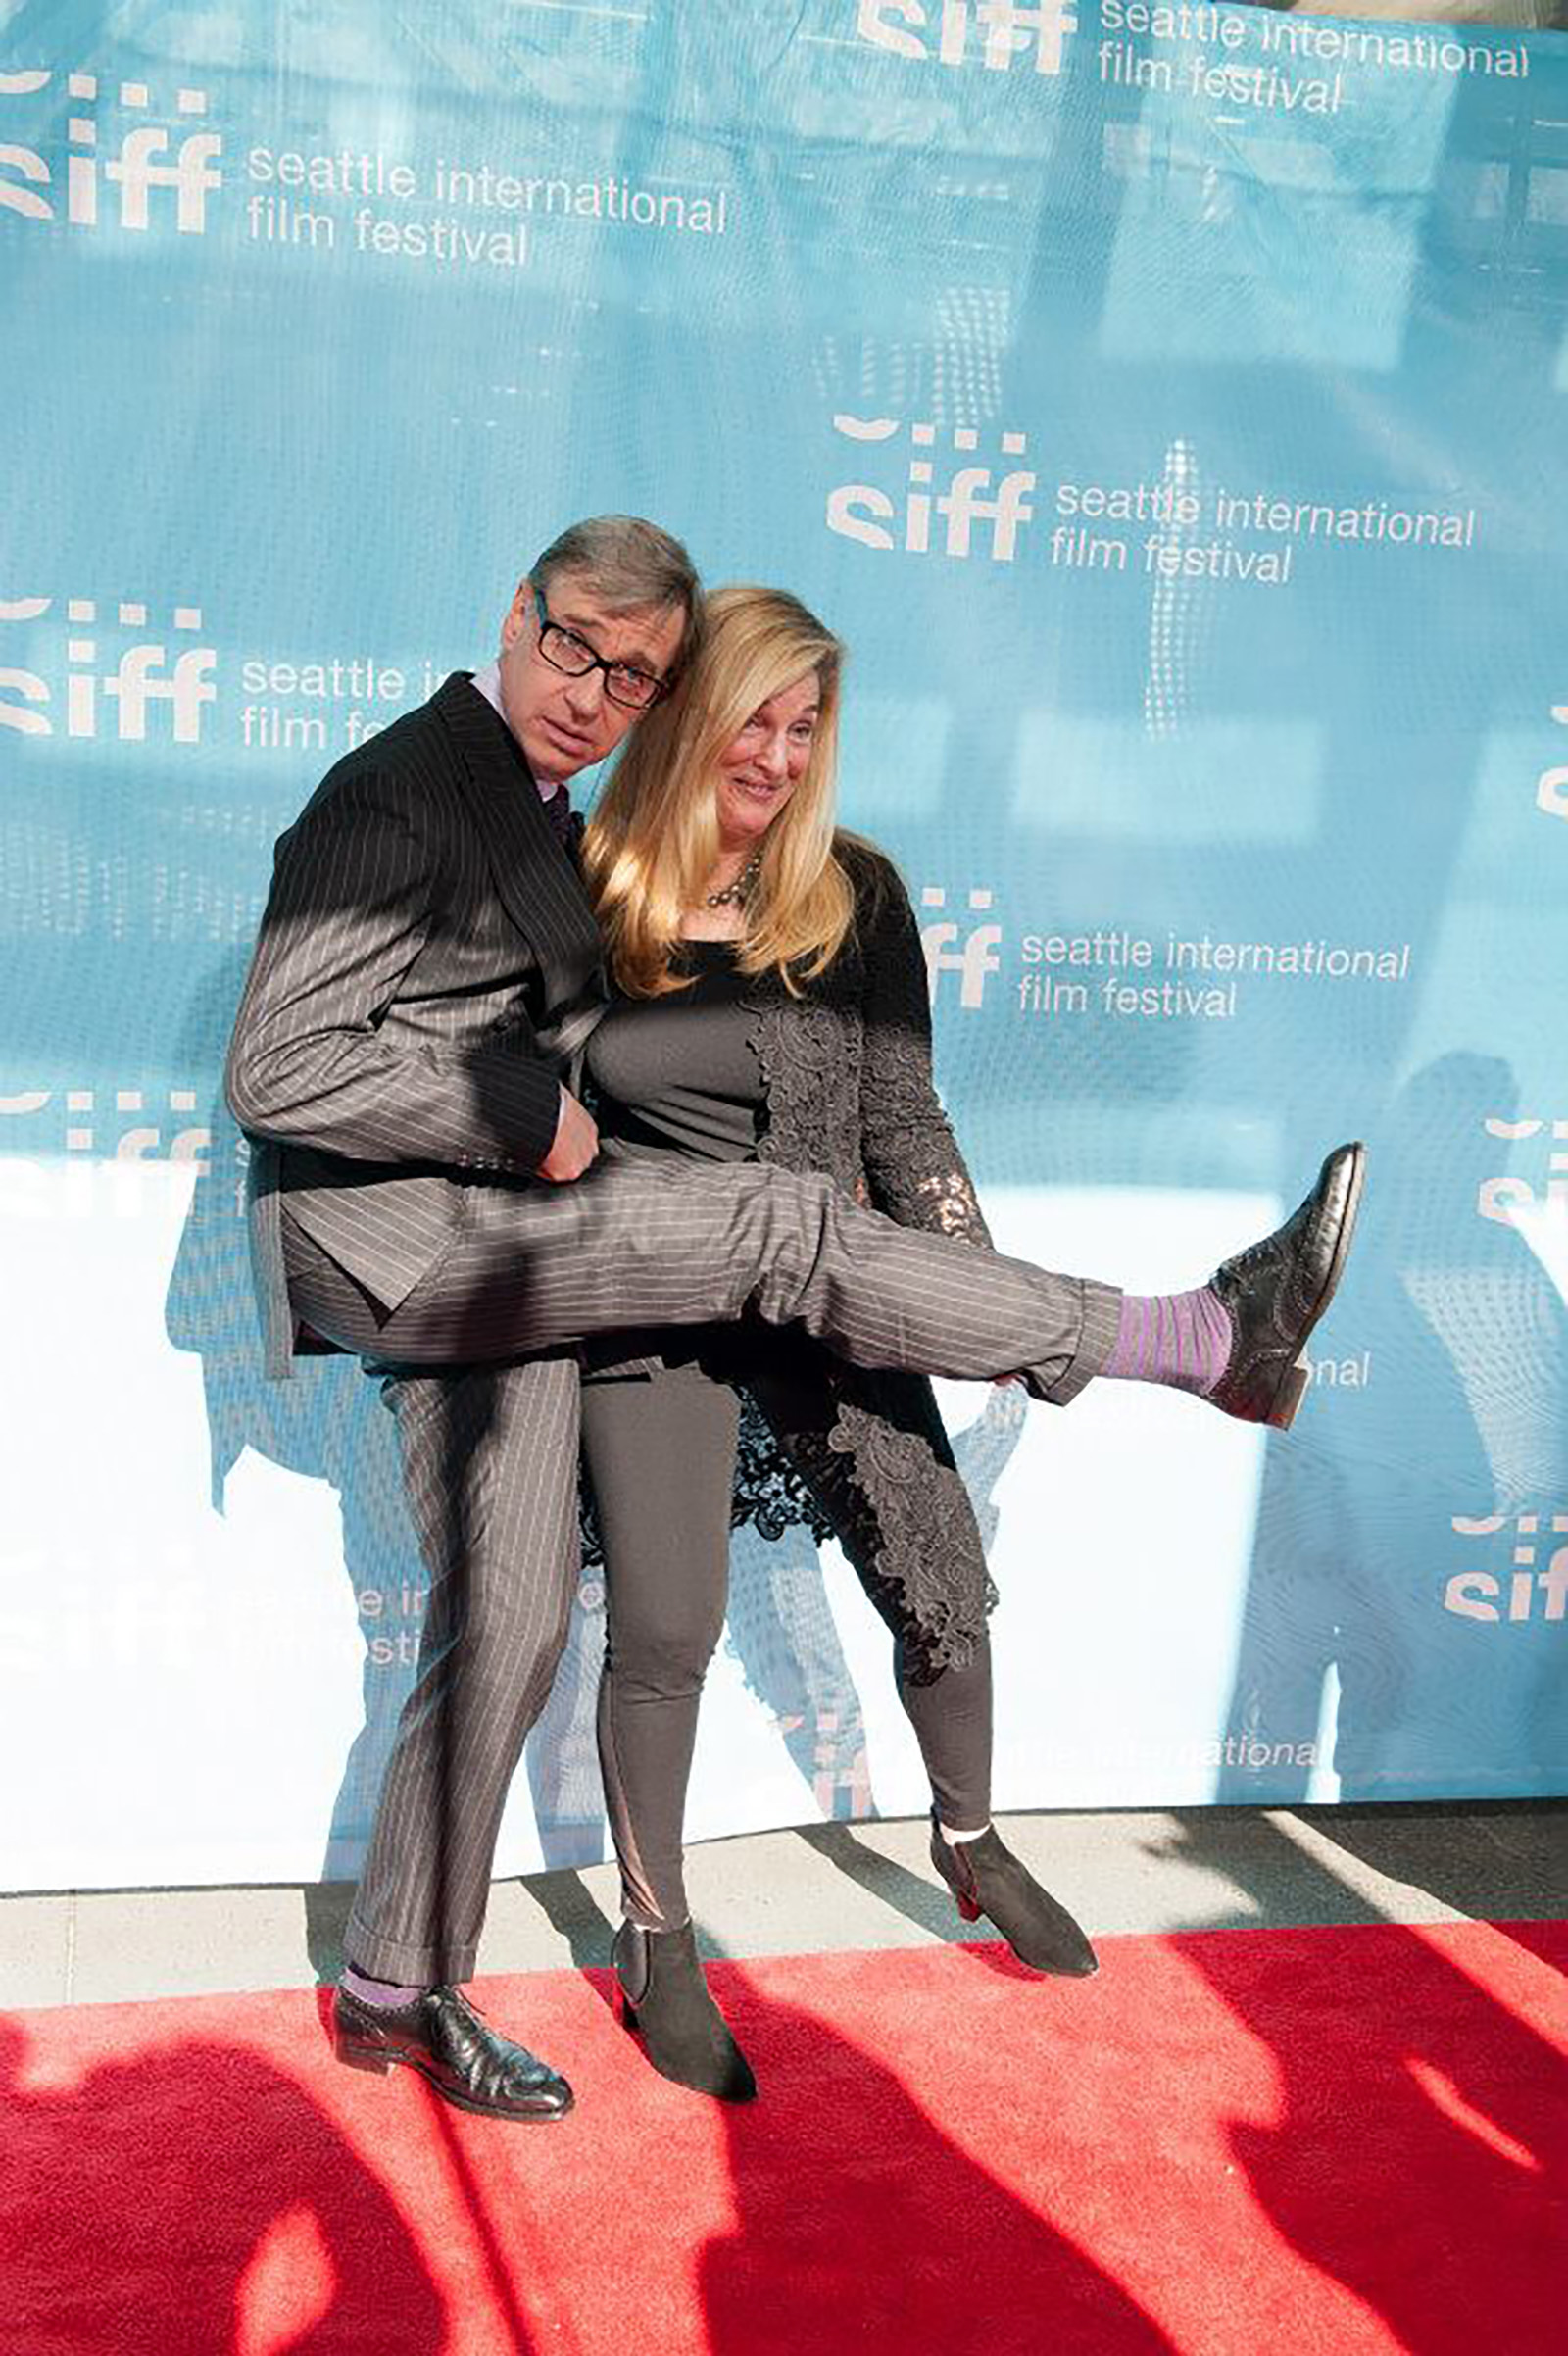 Director, Paul Feig, with wife, Laurie Feig, on the McCaw Hall red carpet for Opening Night, which included a screening of Paul's film, Spy